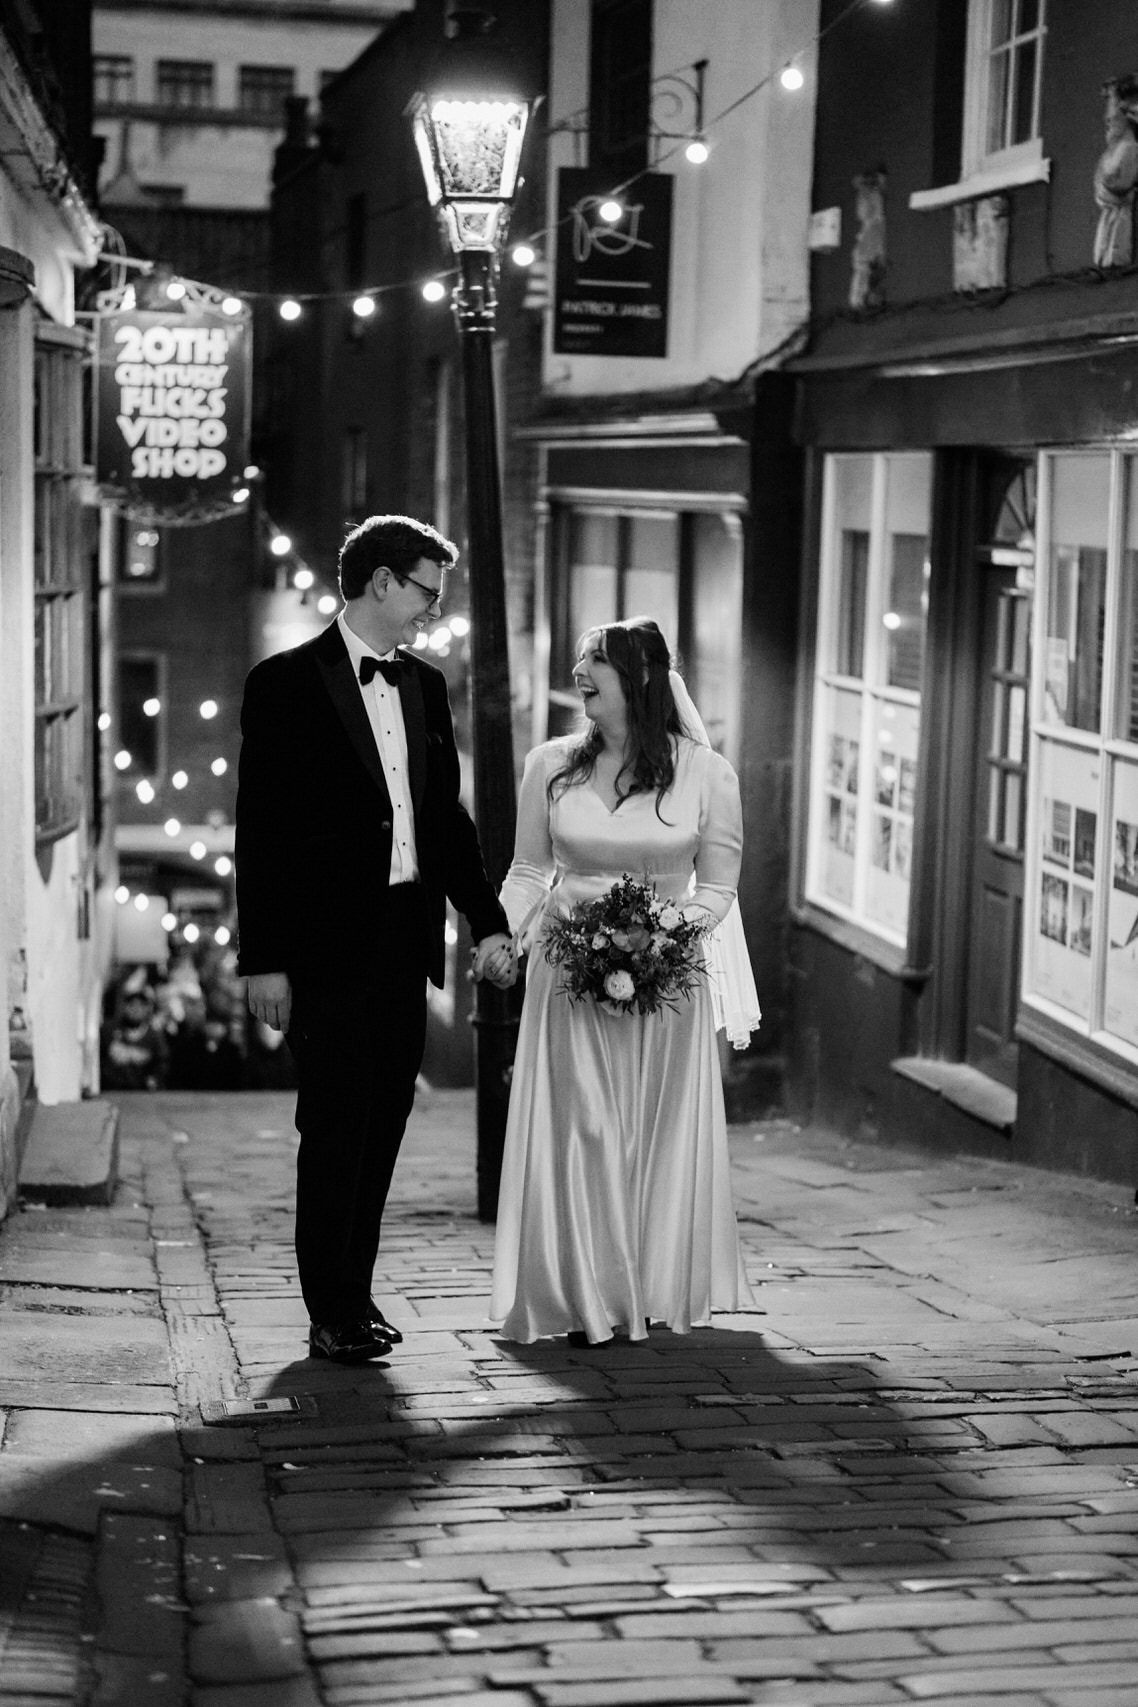 A couple just married is strolling down a street with cobblestones.